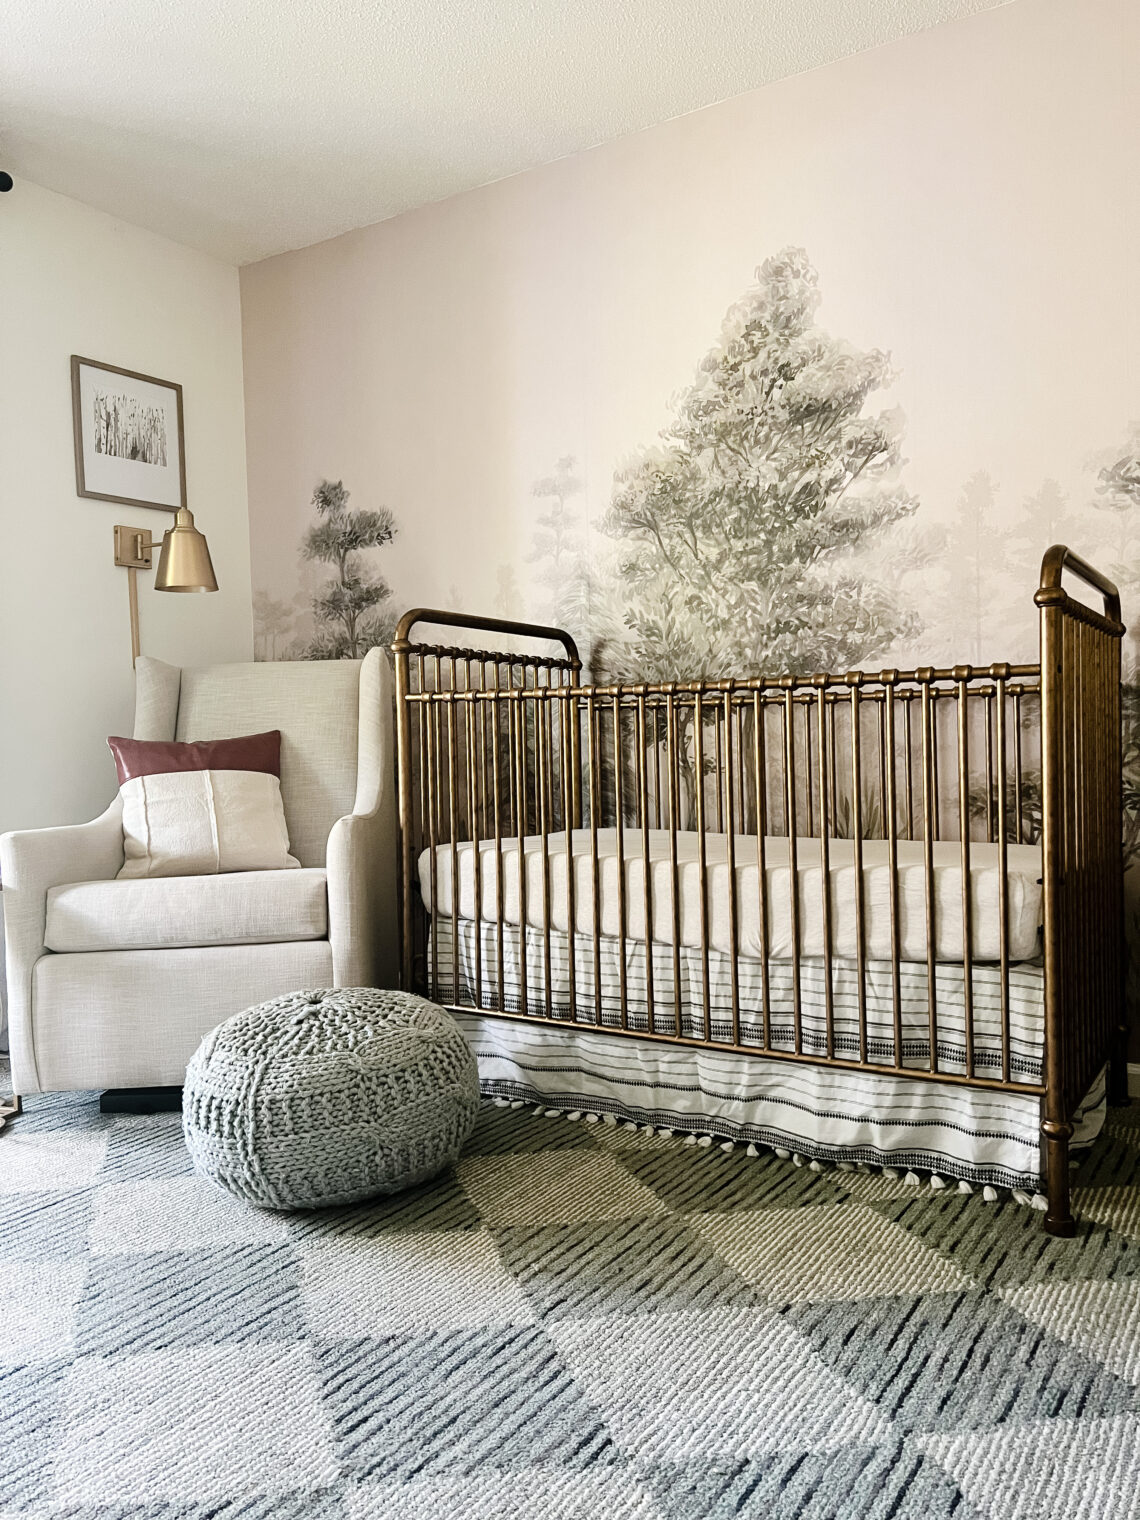 My Top Nursery Wallpaper Mural Tips and Picks for Boy Nursery - Forrester  Home